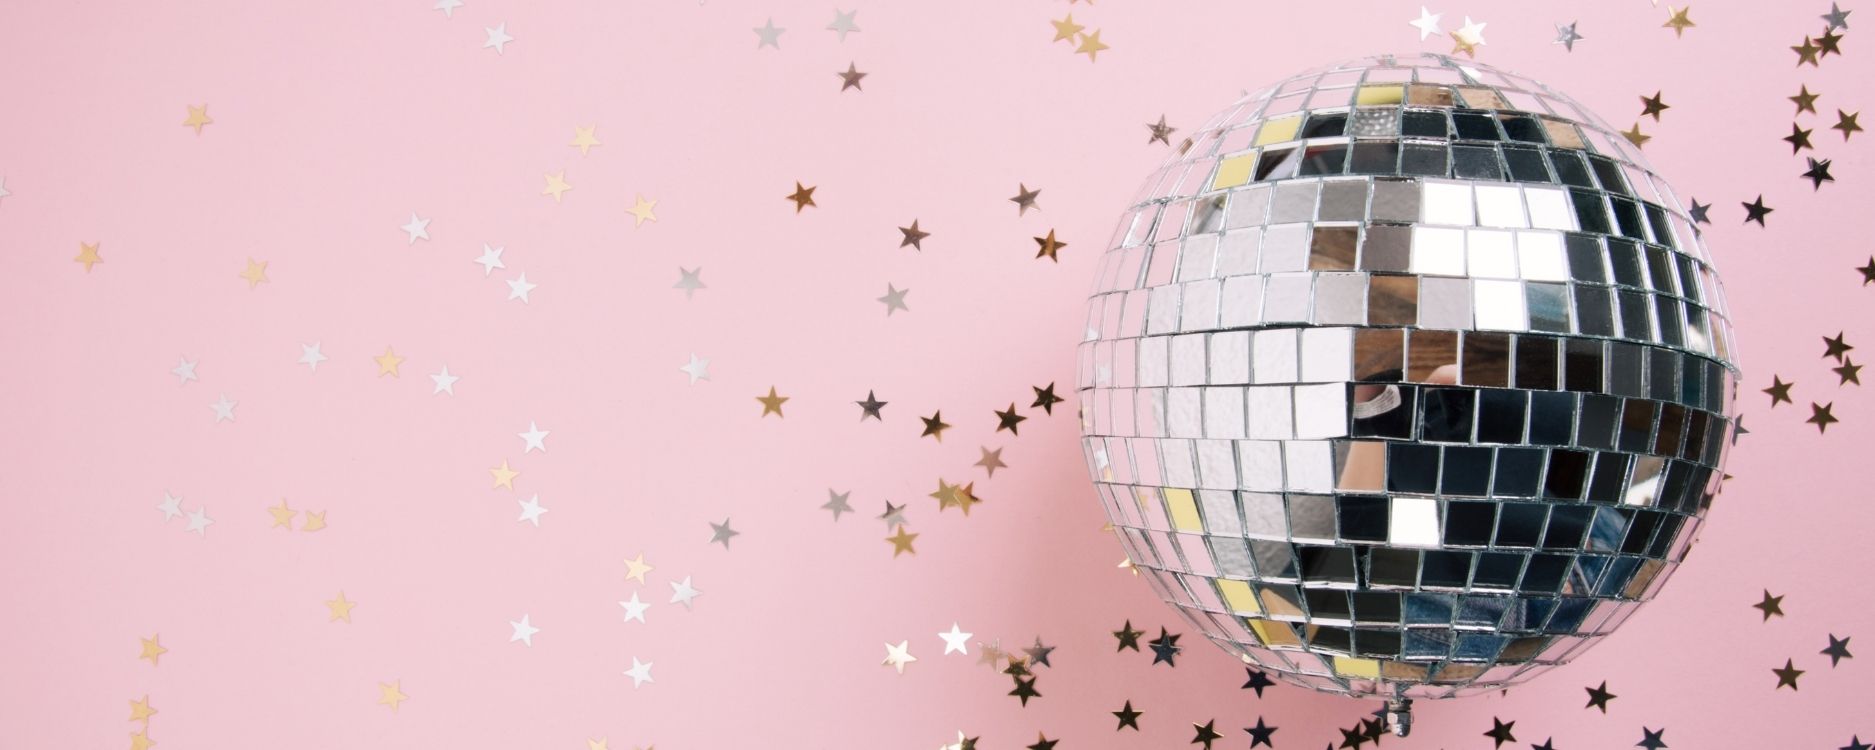 pink background with star confetti and a disco ball - stop getting distracted with shiny object syndrome